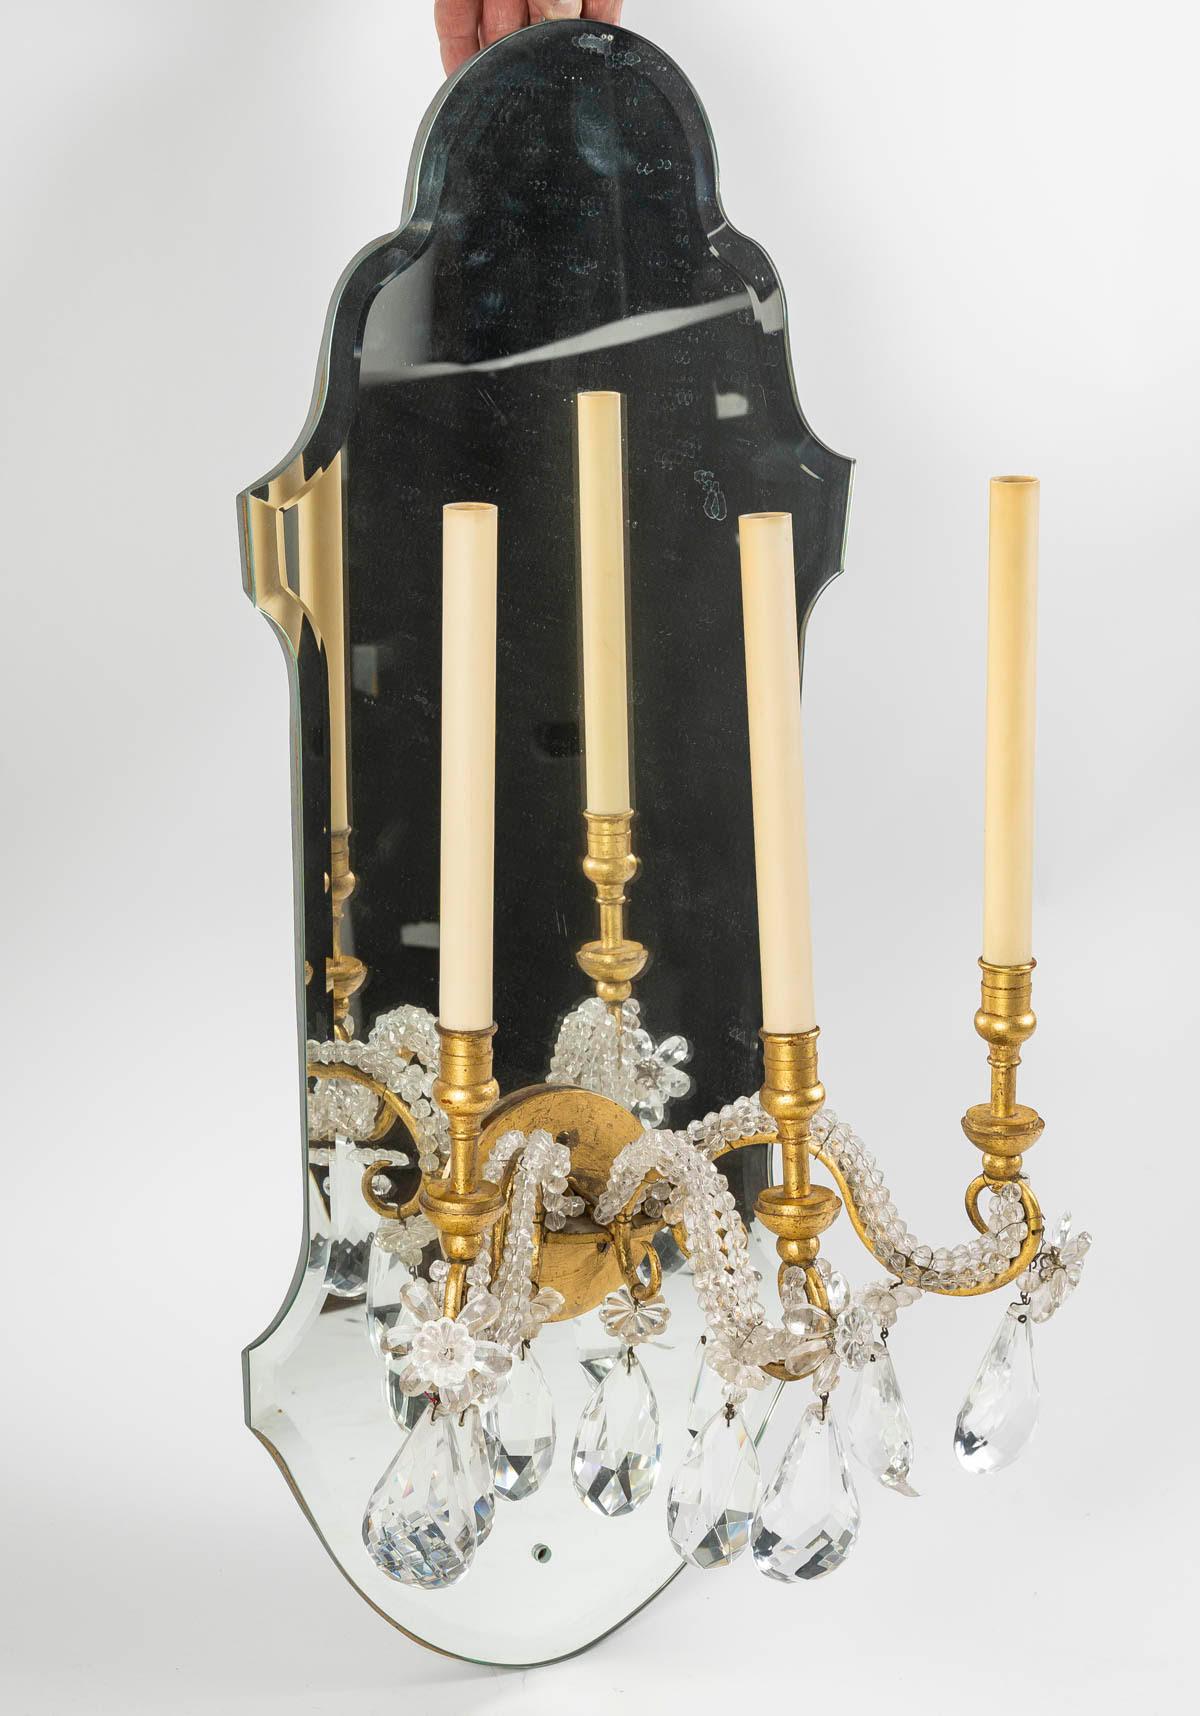 20th Century Suite of 6 Gilded Iron and Mirror Sconces with Glass Drops, 1950-1960.